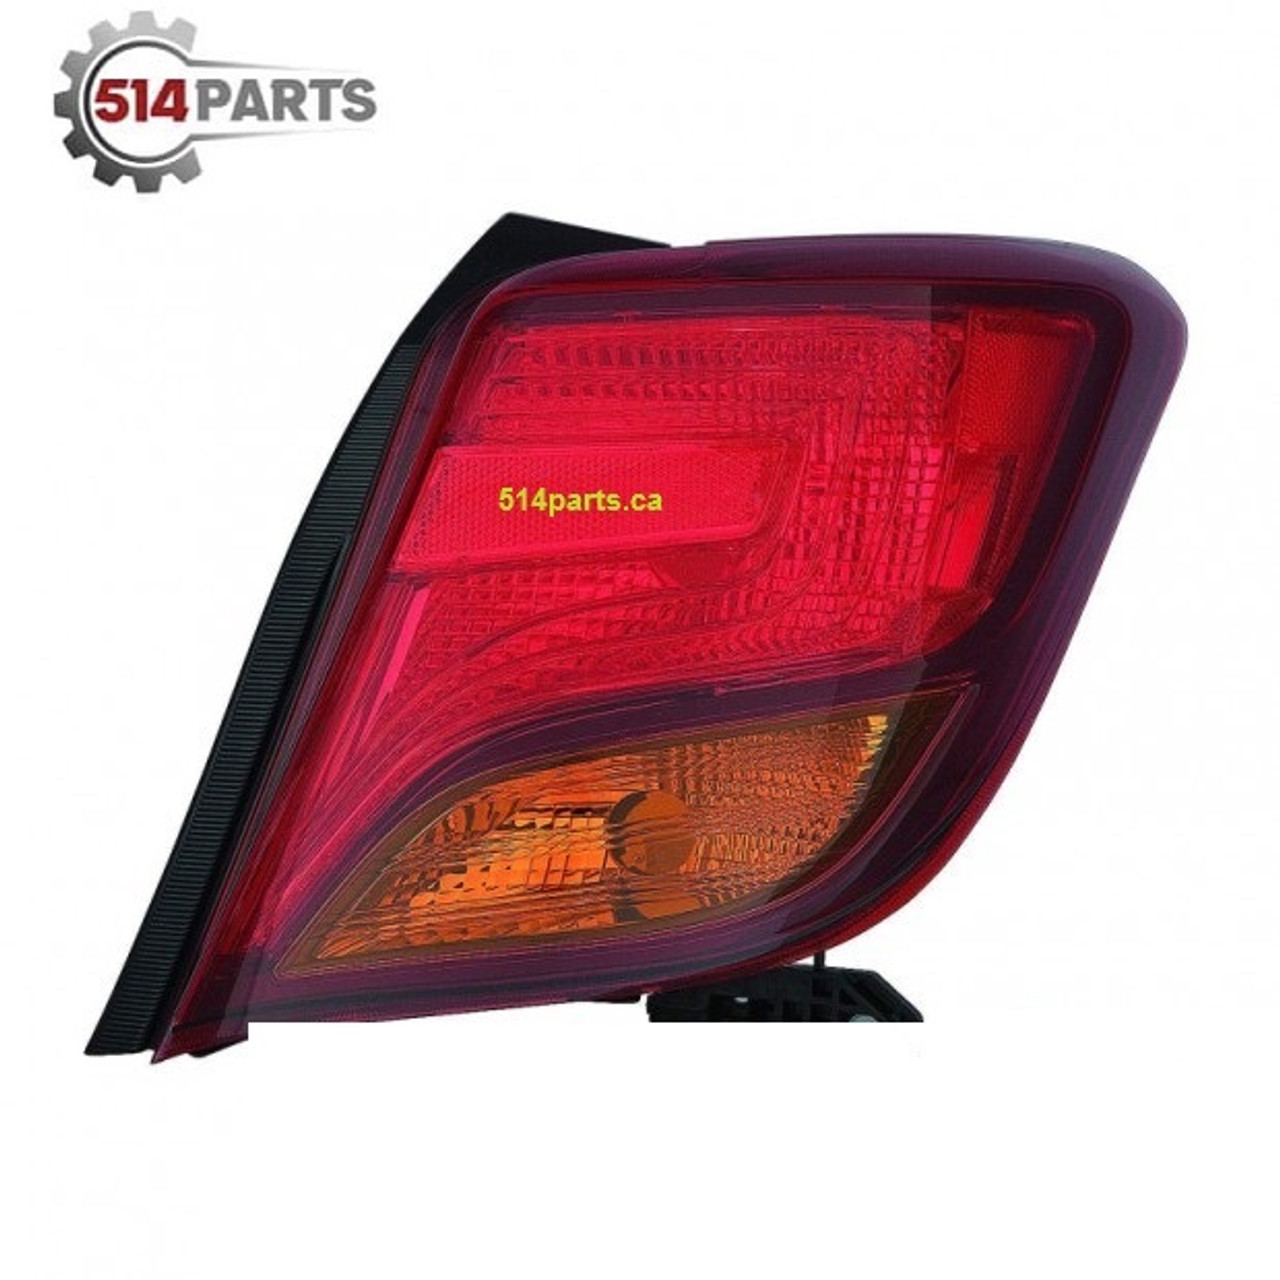 2015 - 2017 TOYOTA YARIS HATCHBACK TAIL LIGHTS High Quality - PHARES ARRIERE Haute Qualite